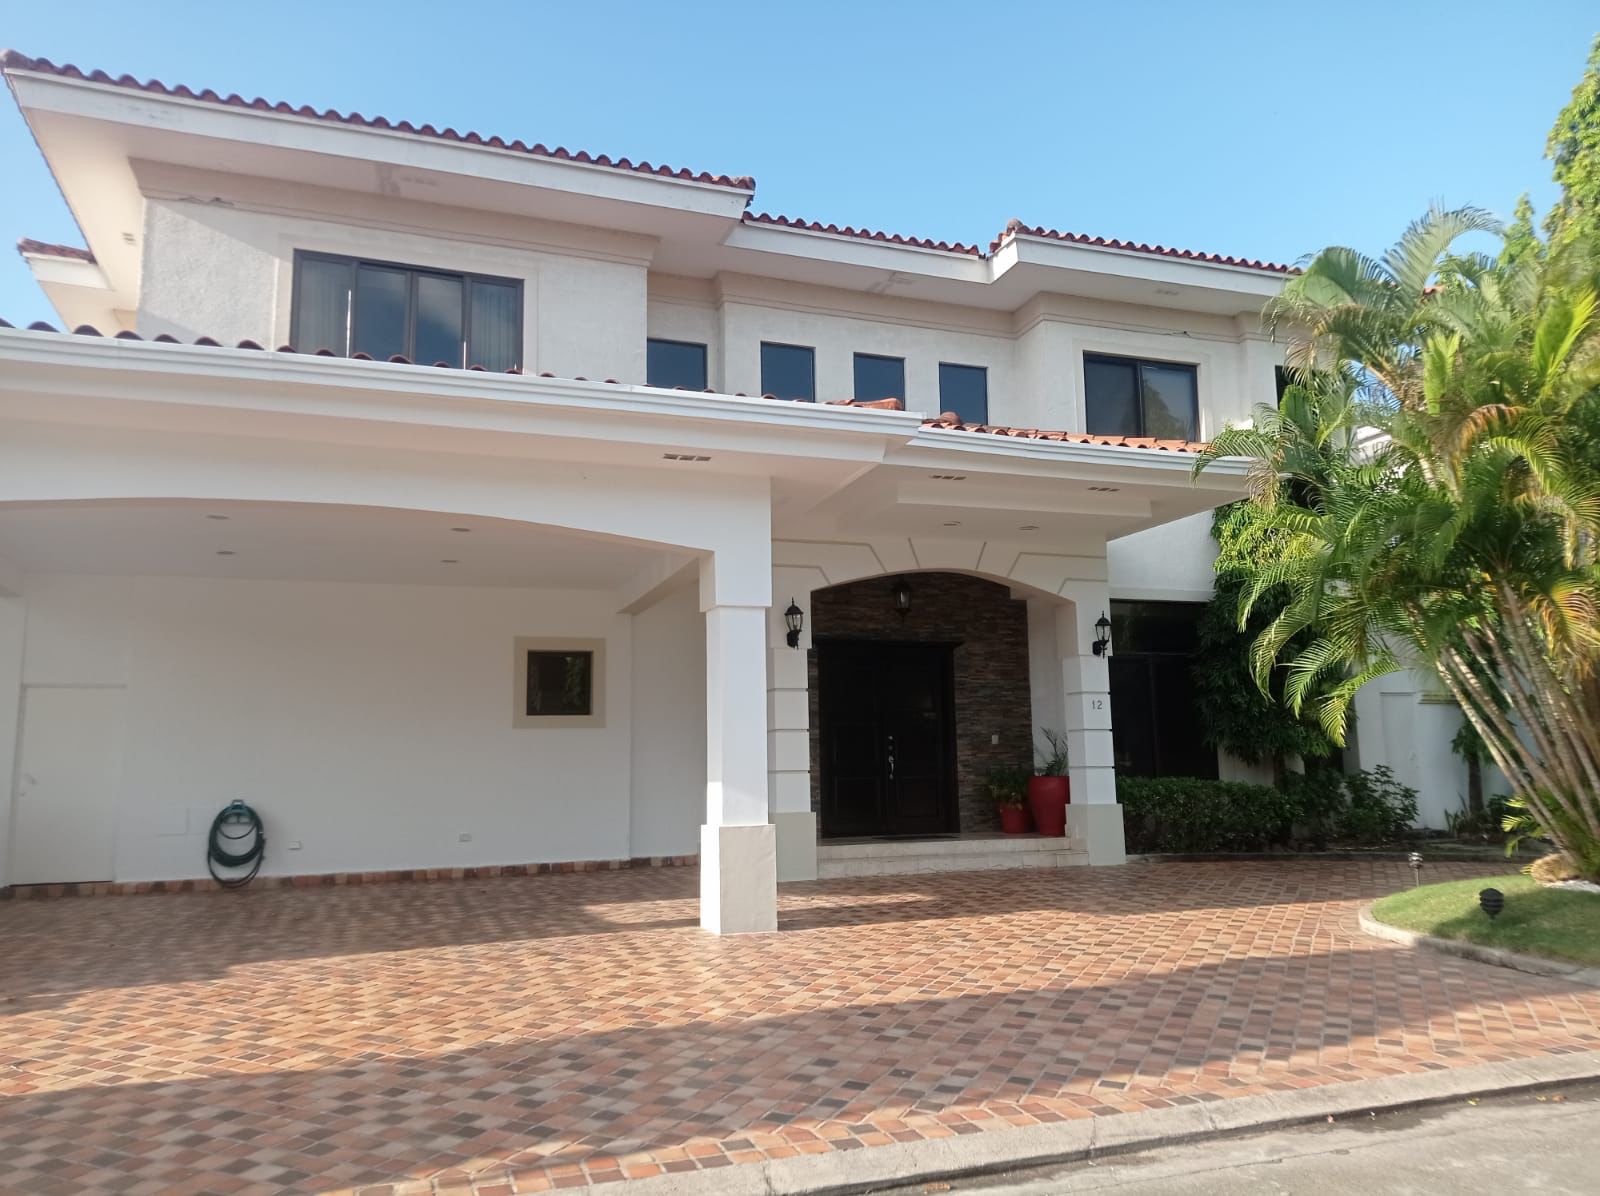 Luxurious 5-Bedroom Two-Story House in Costa del Este, Panama City - Property ID PLS-18554